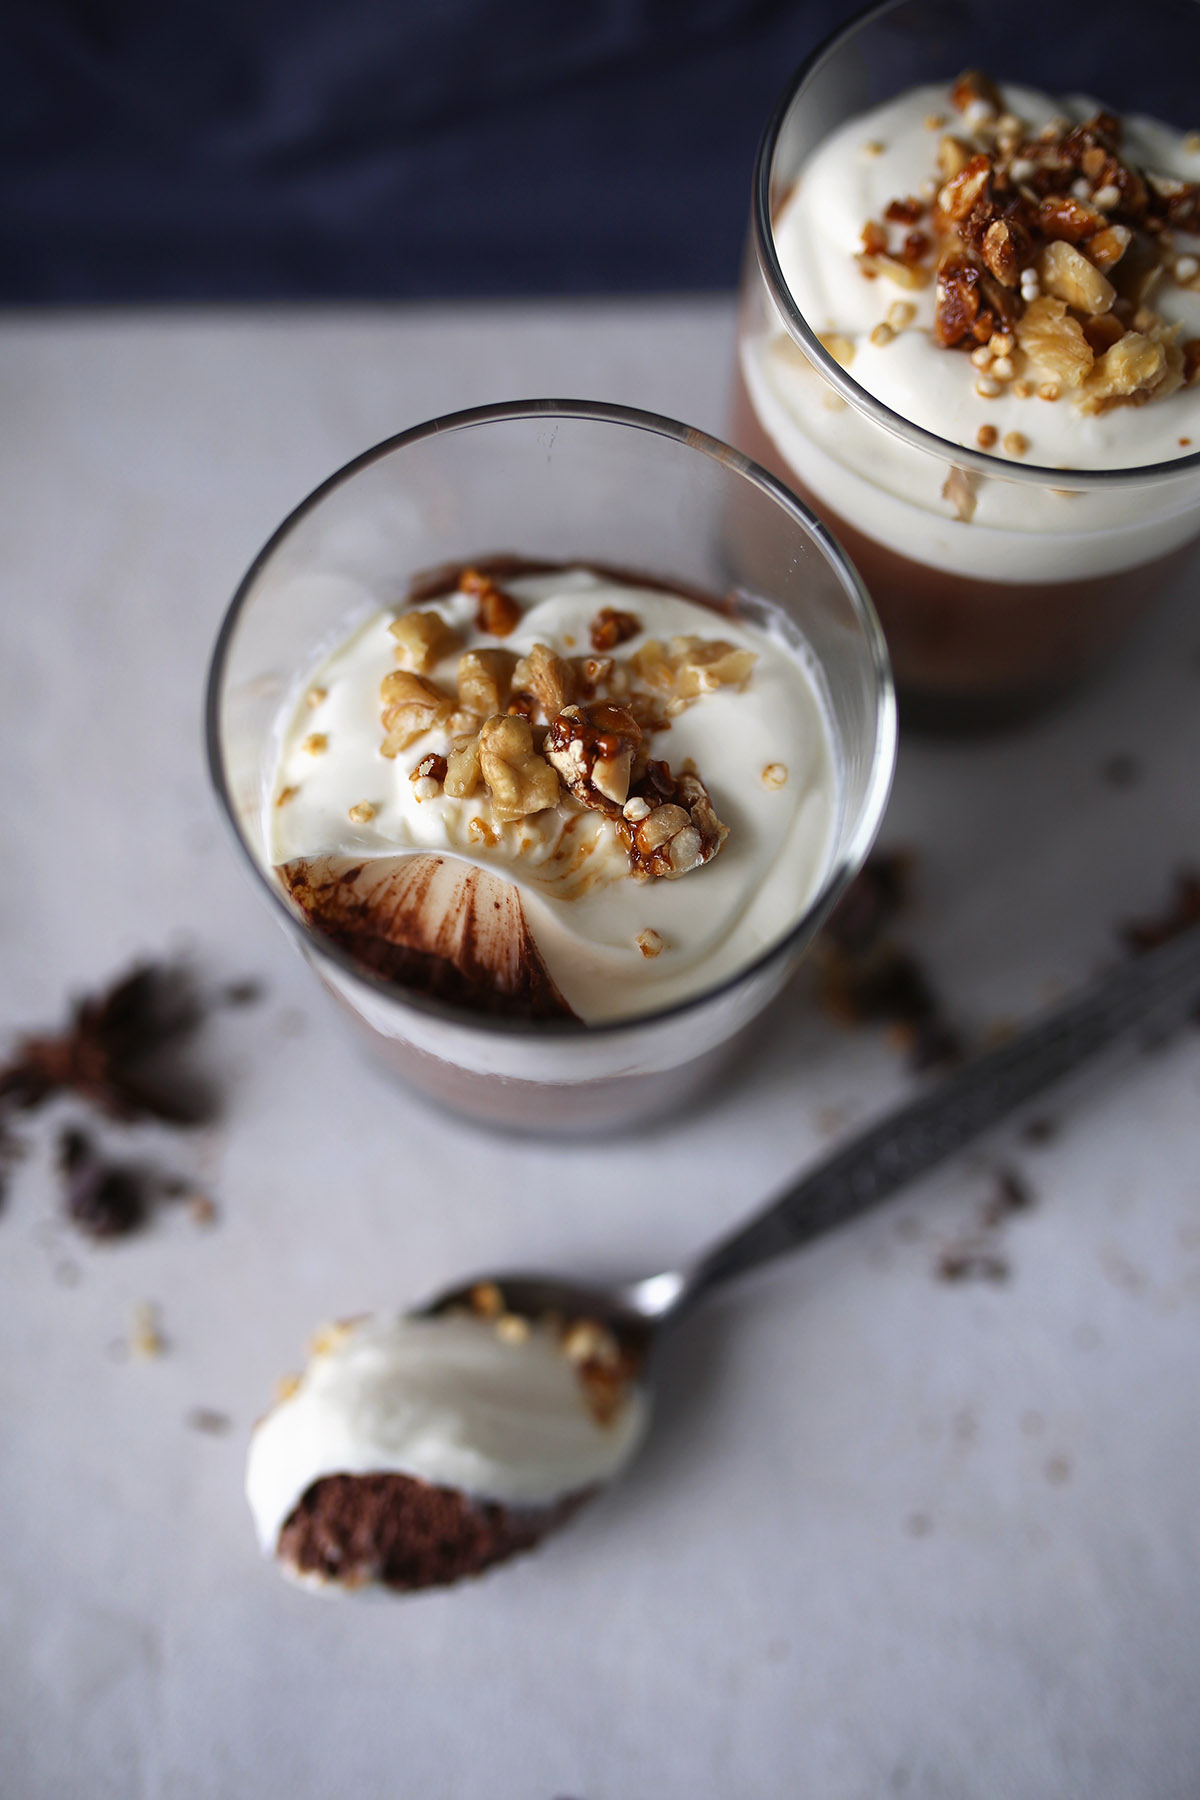 Chocolate mousse with coconut whipped cream